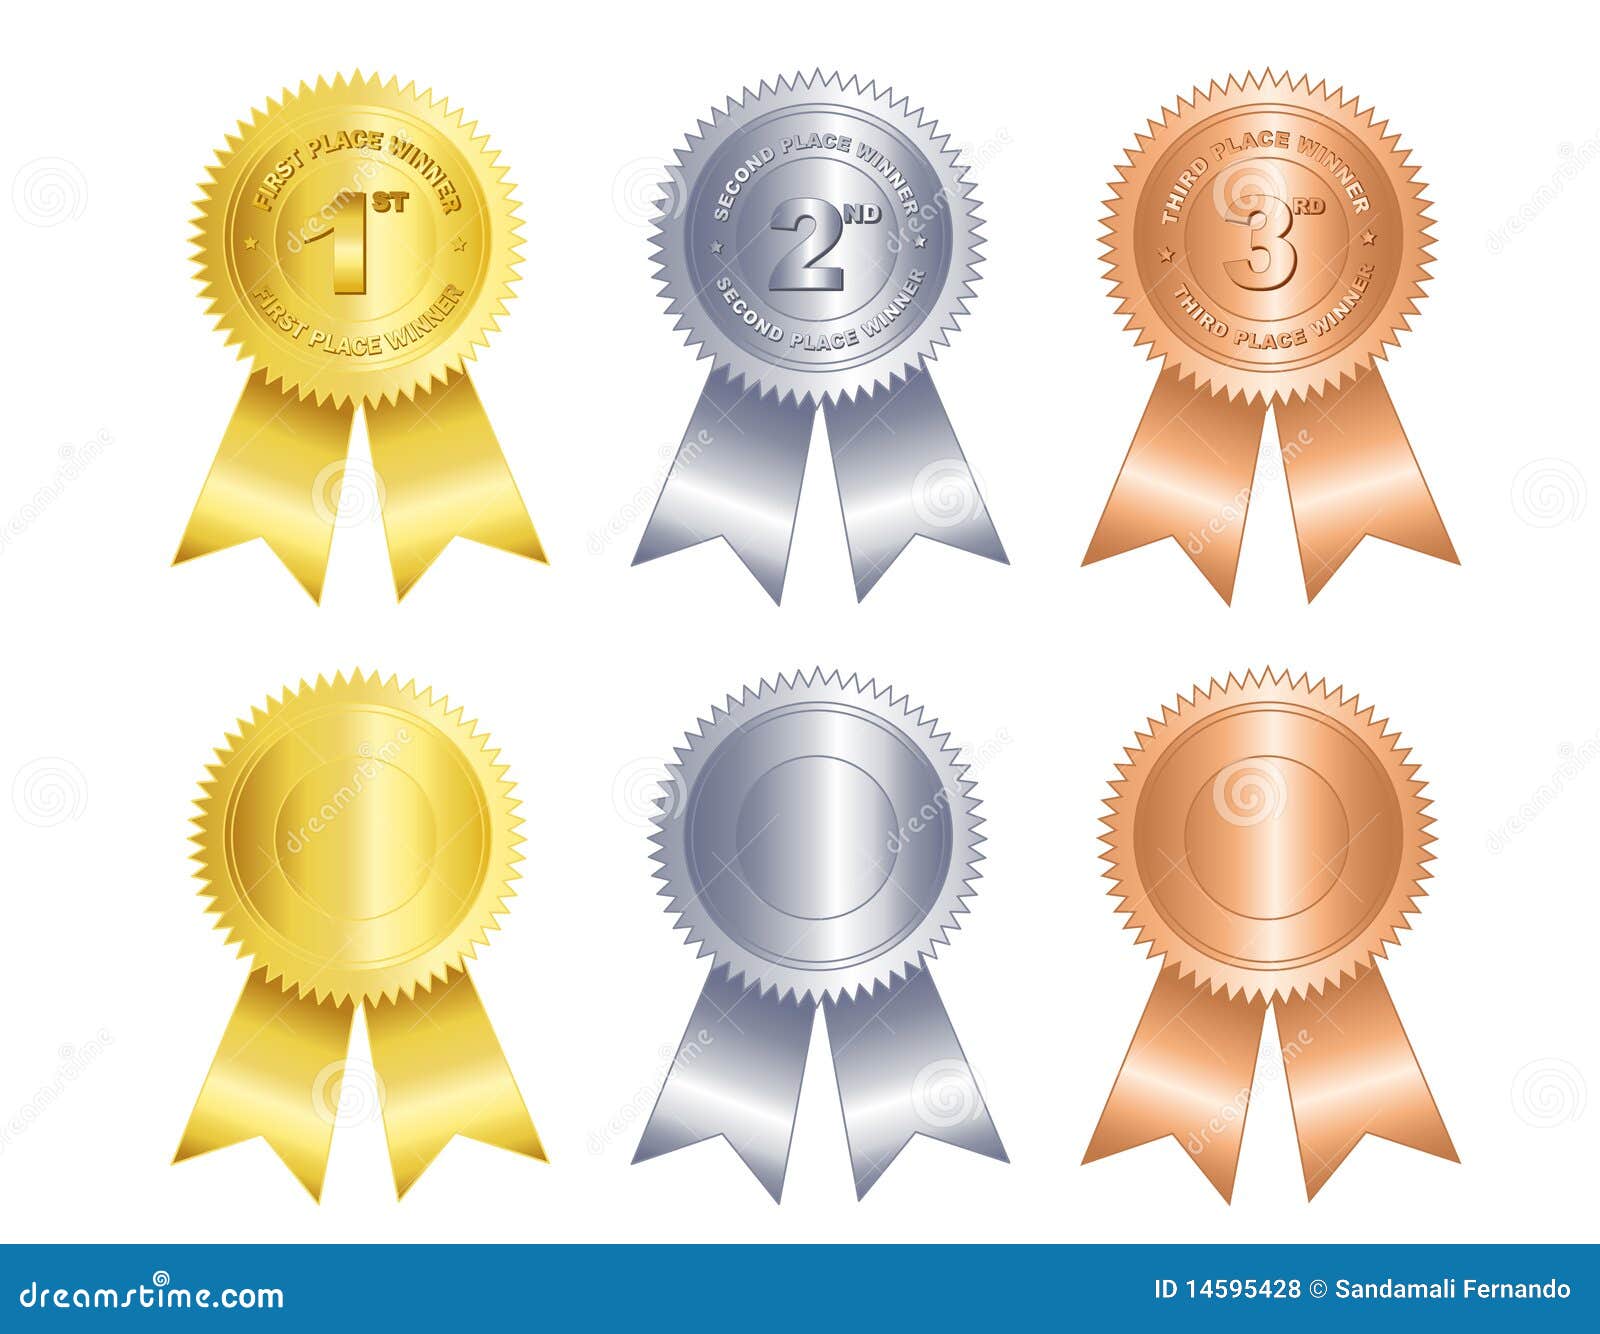 first-second-third-place-ribbon-royalty-free-stock-photos-image-14595428